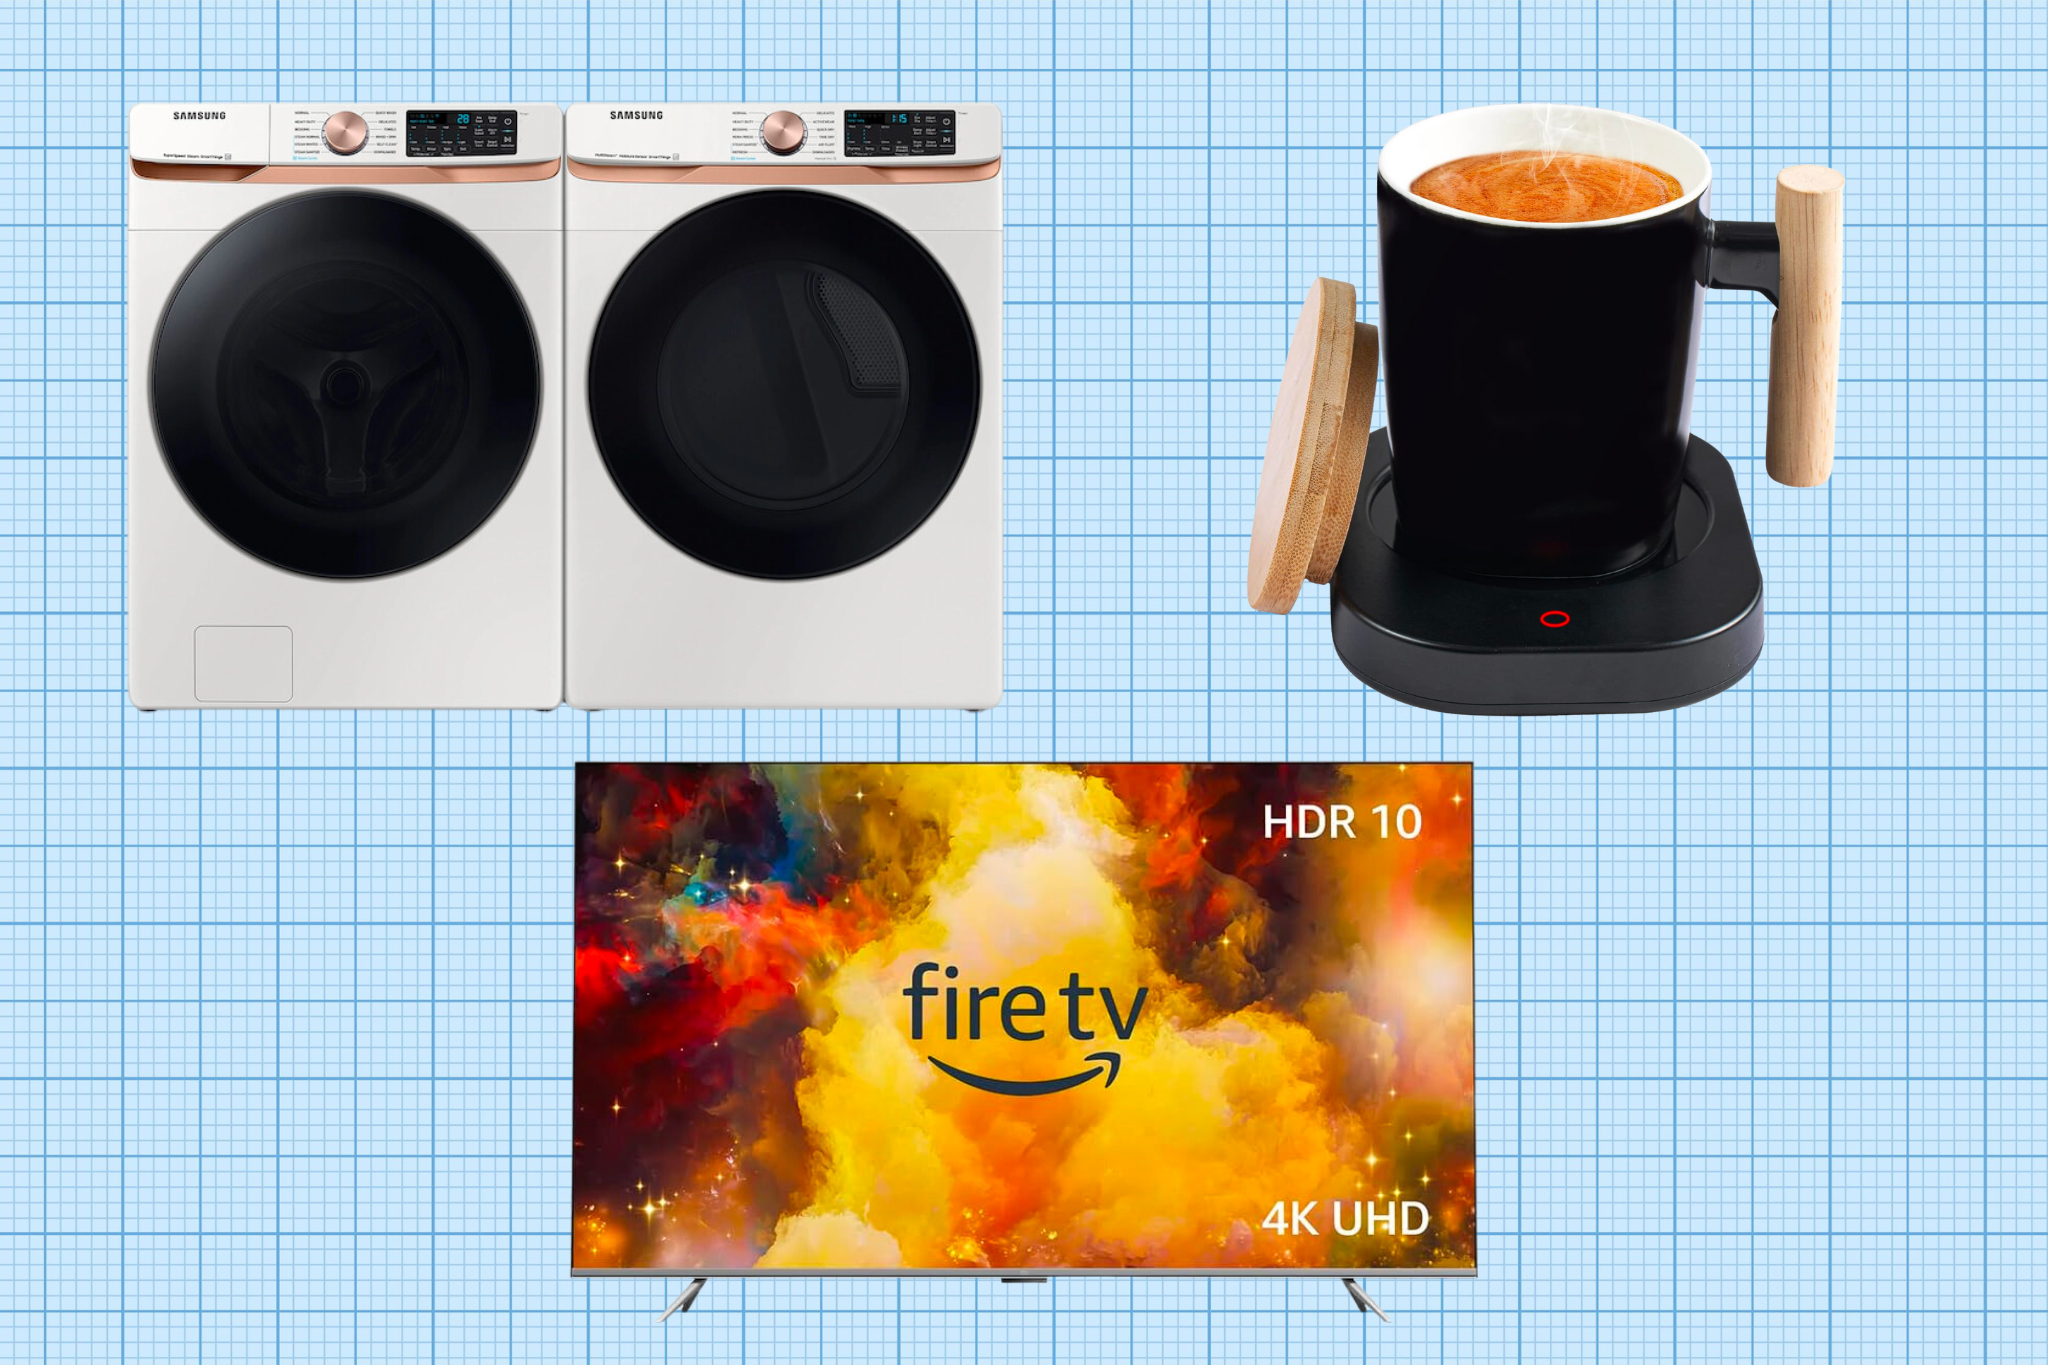 Samsung Smart Front Load Washer and Smart Gas Dryer, HOWAY Coffee Cup Warmer, and Amazon Fire TV 75" isolated on a blue grid paper background.